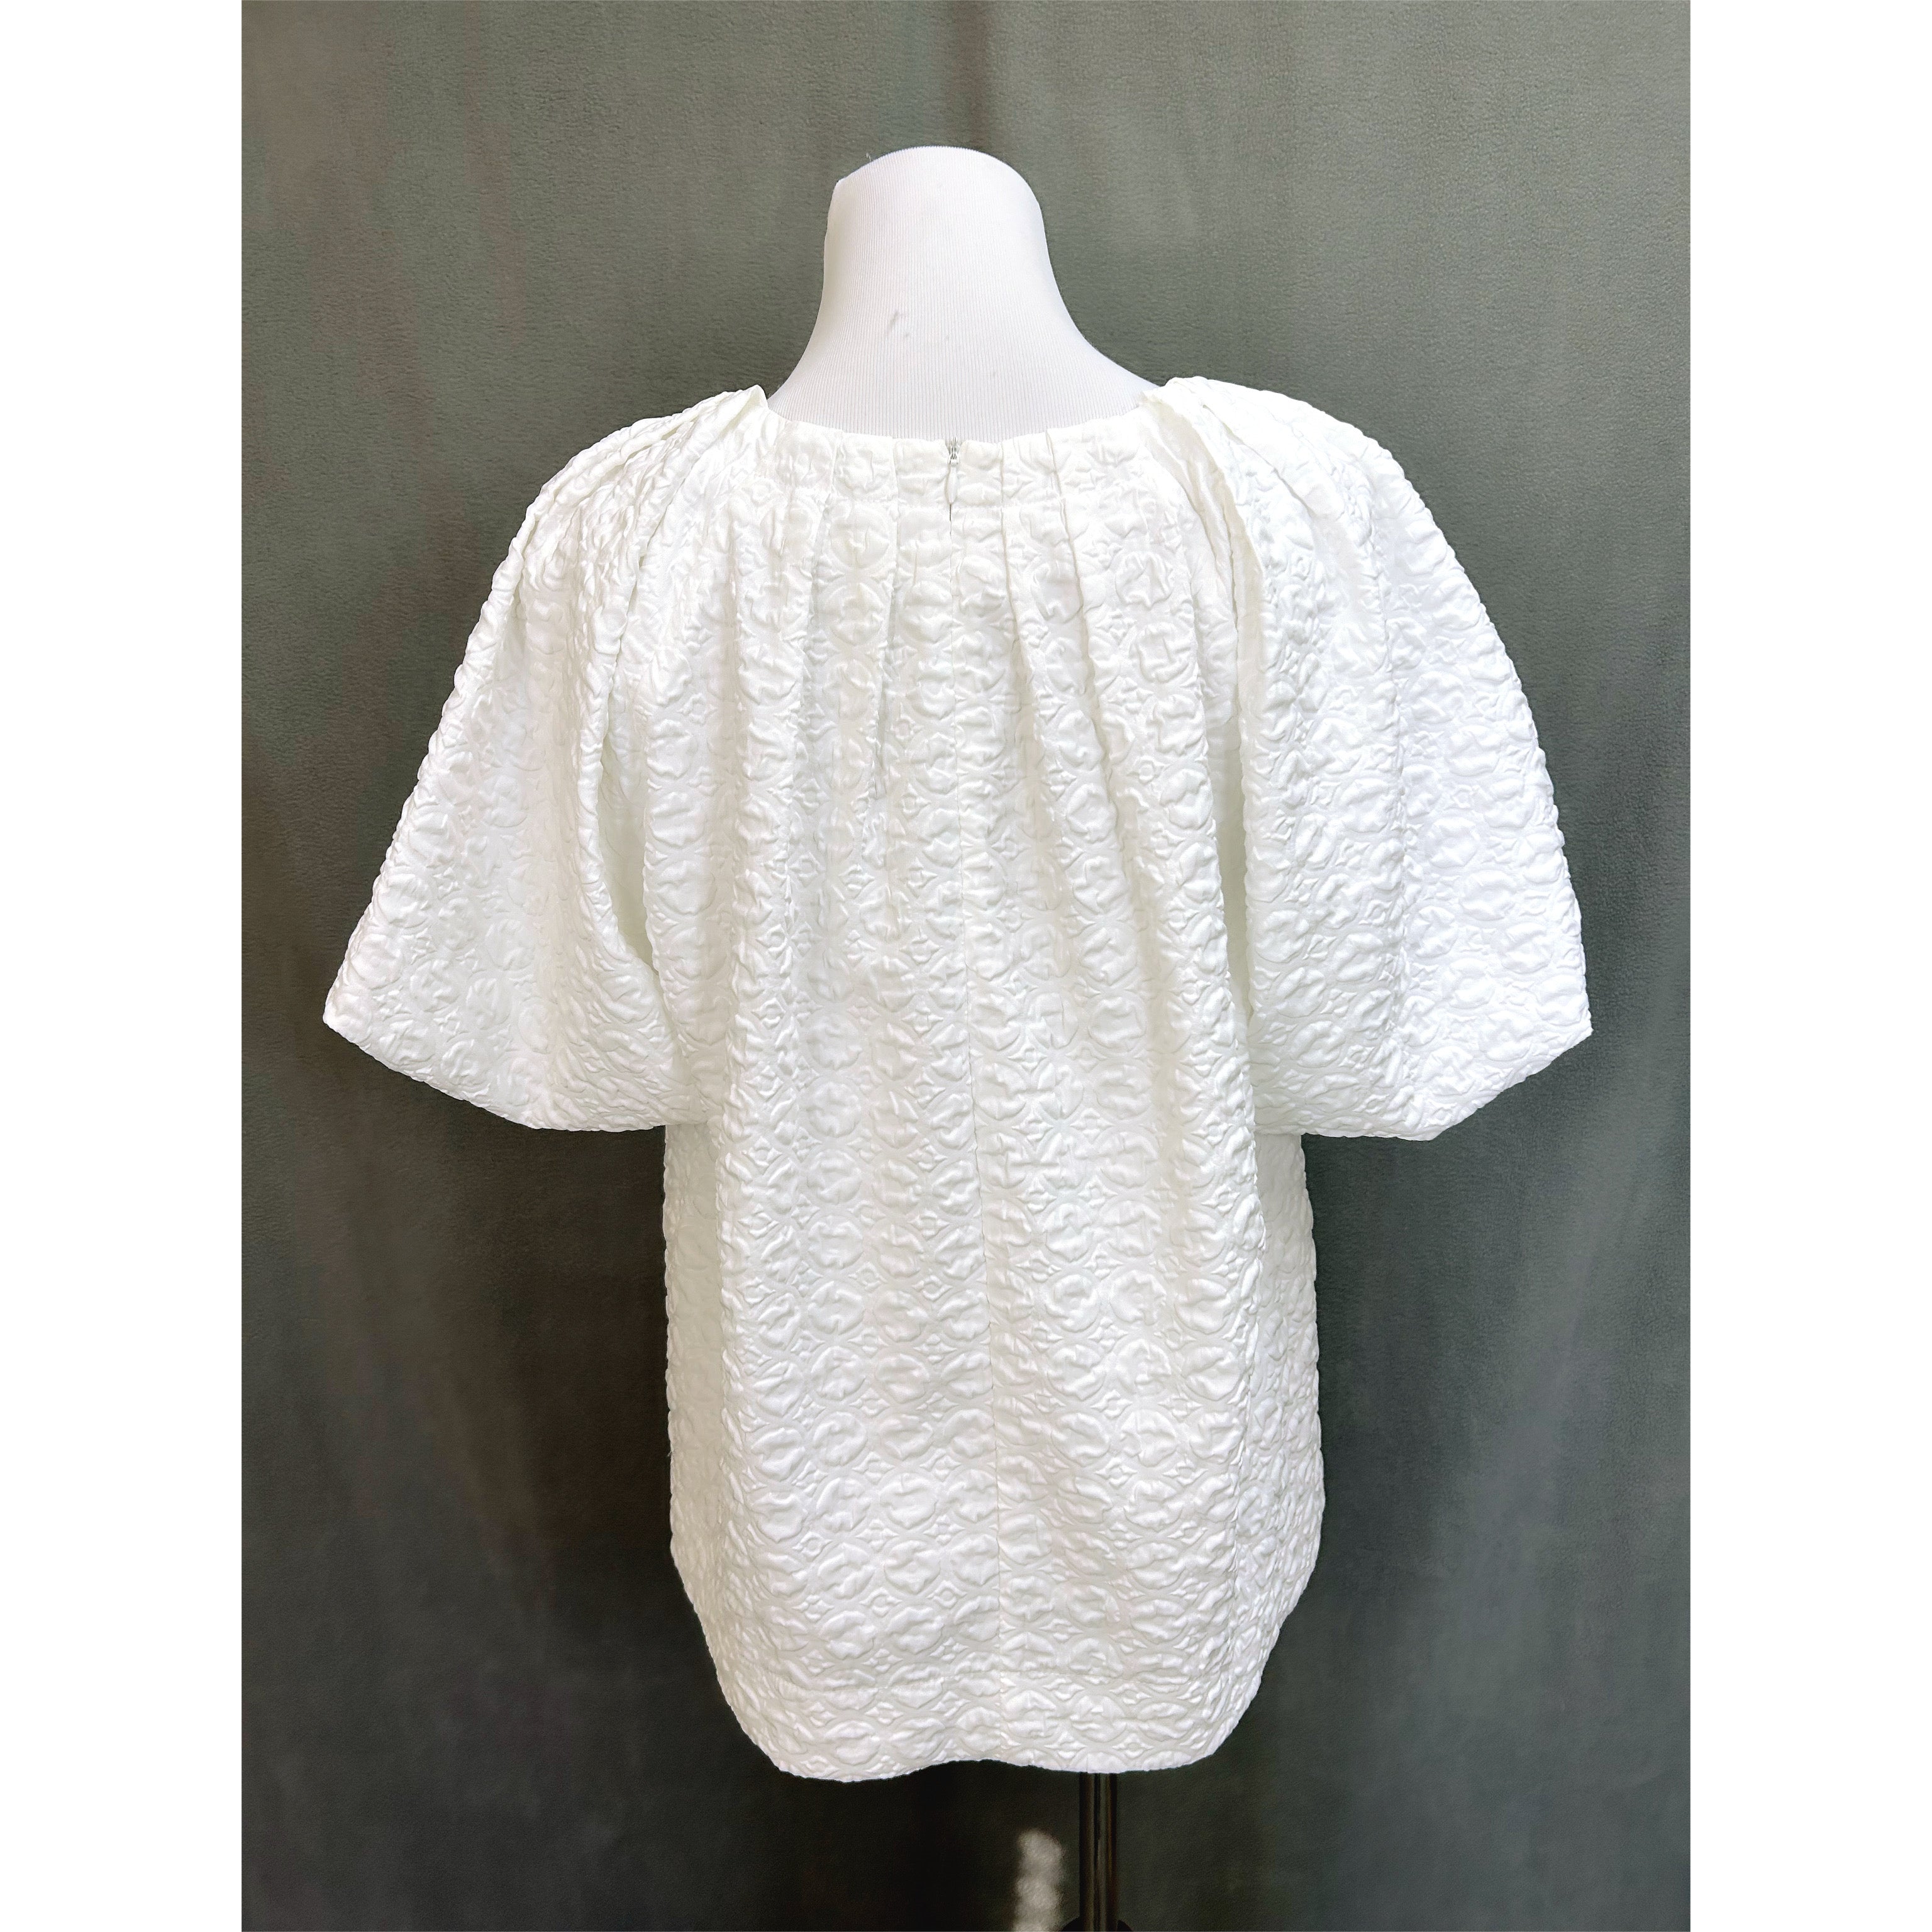 Jade white blouse, size S, NEW WITH TAGS!